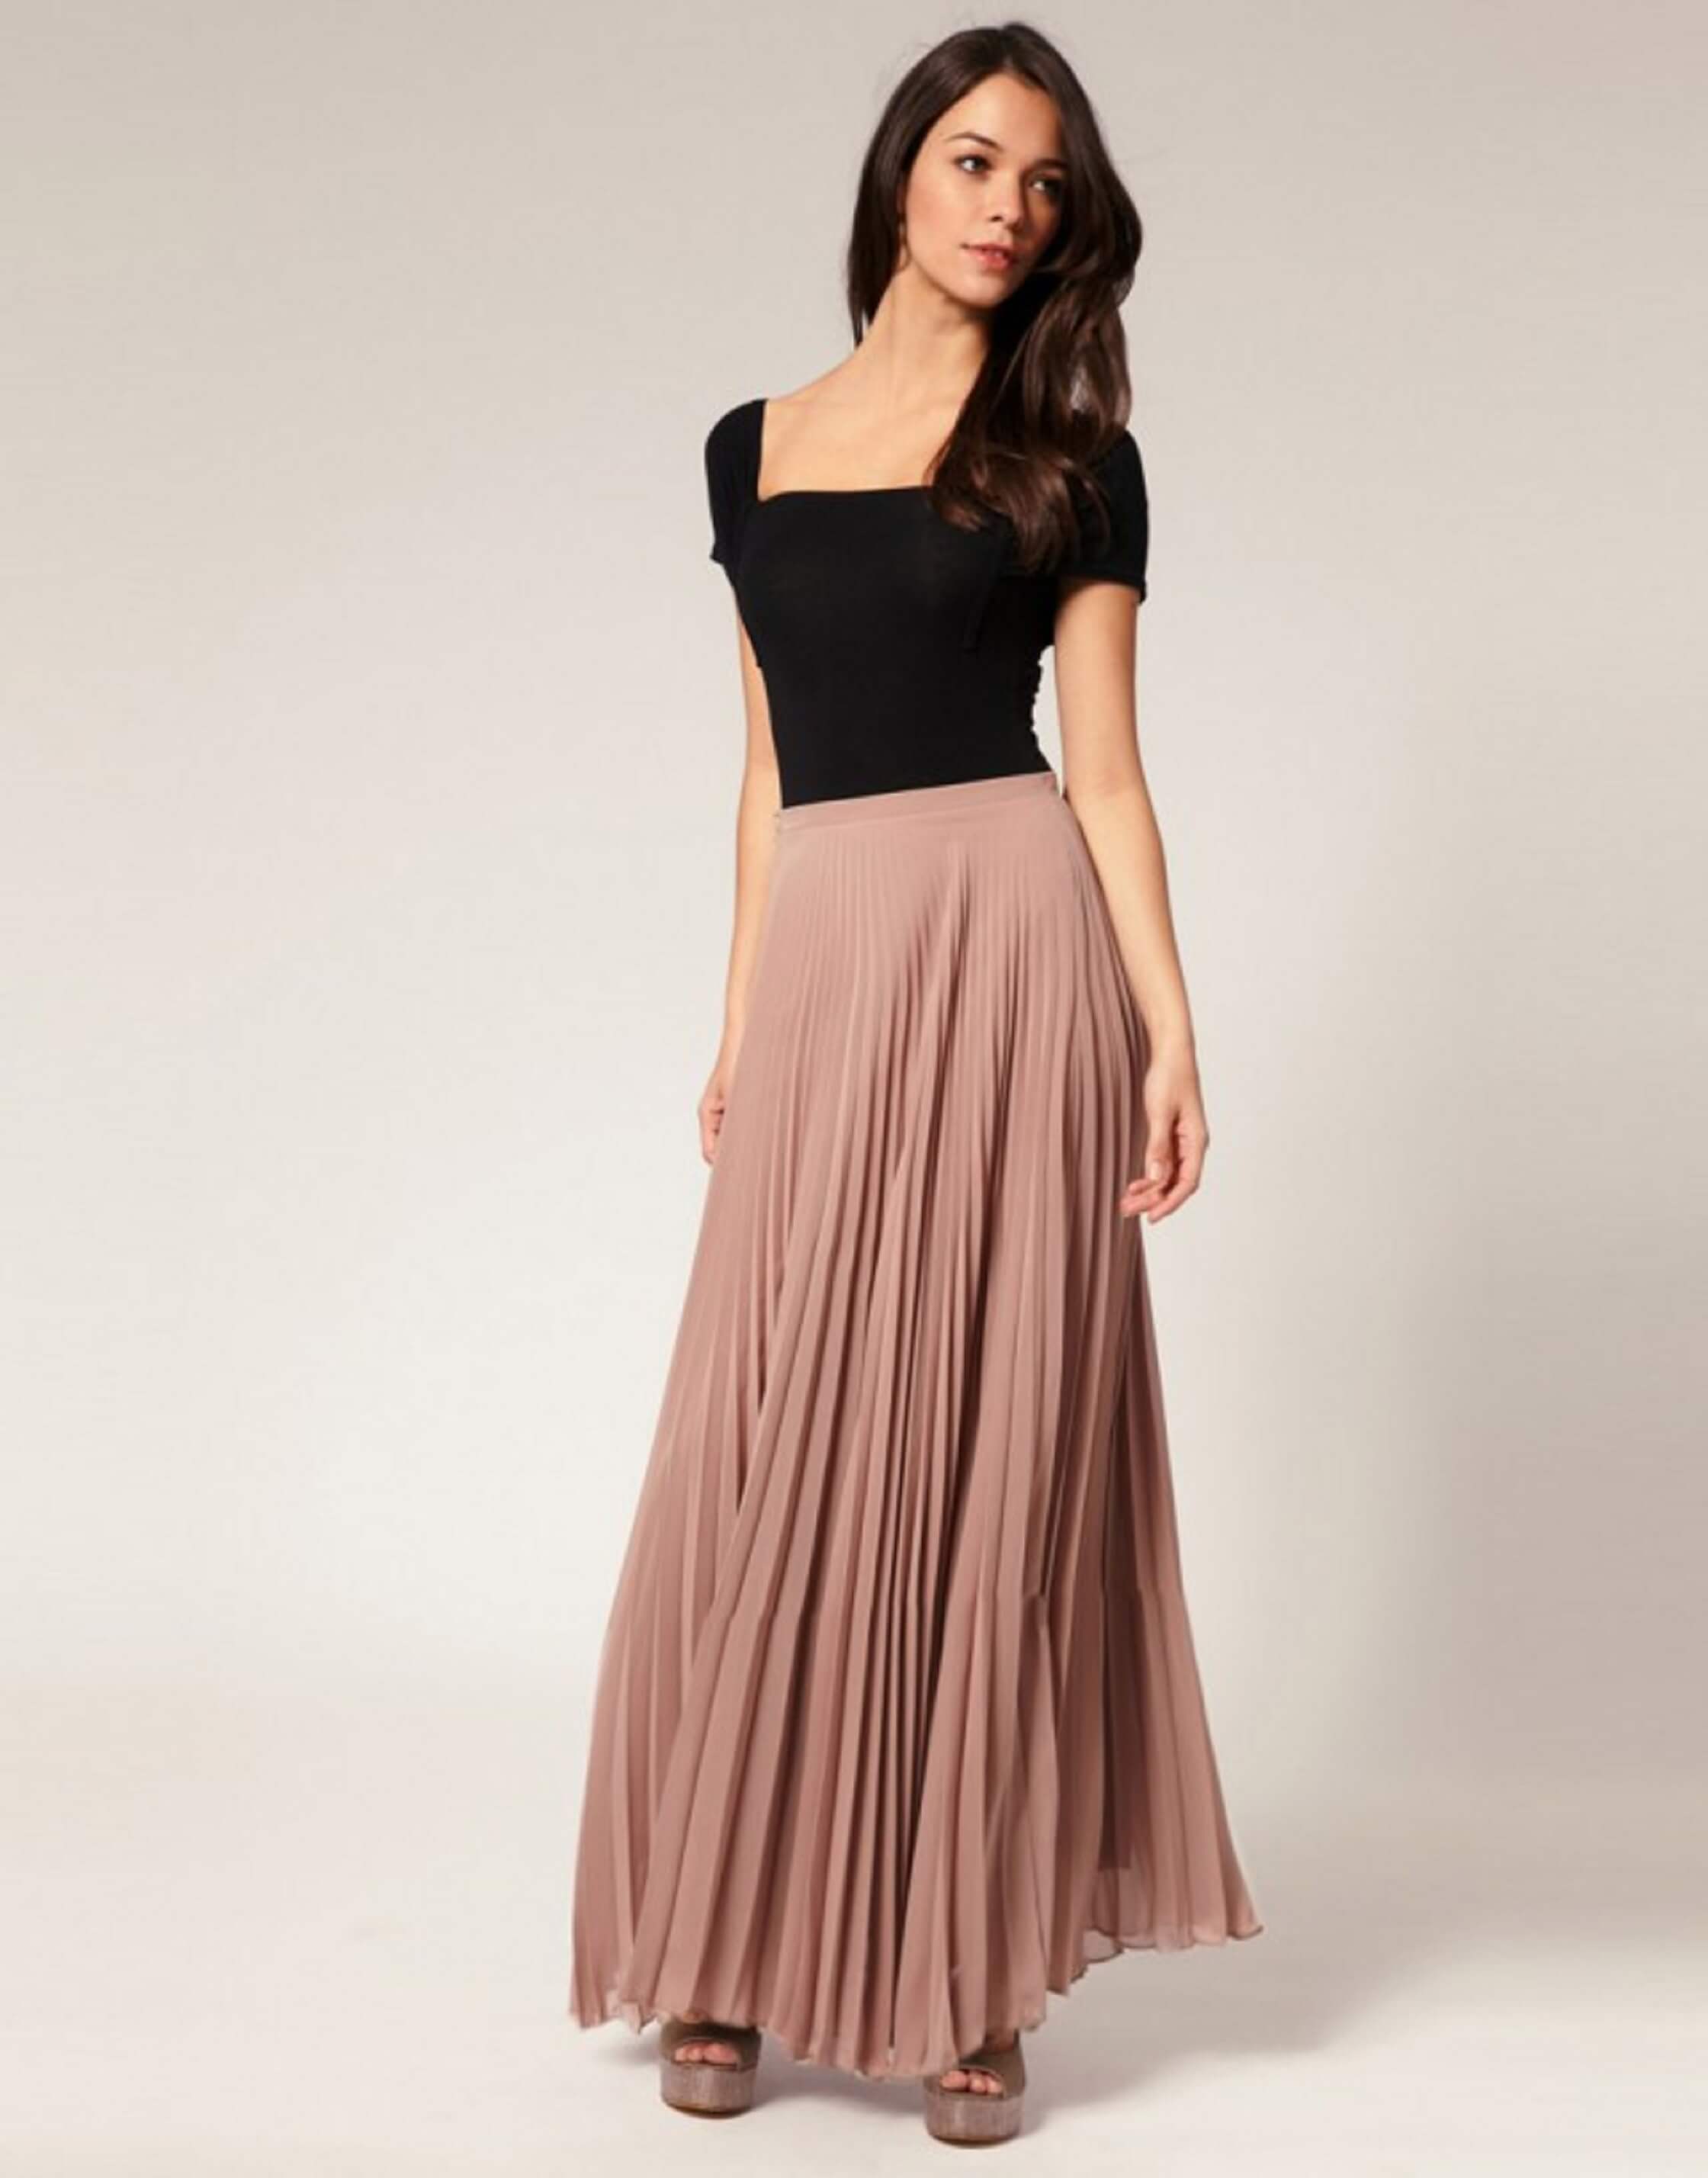 long skirts for women with top